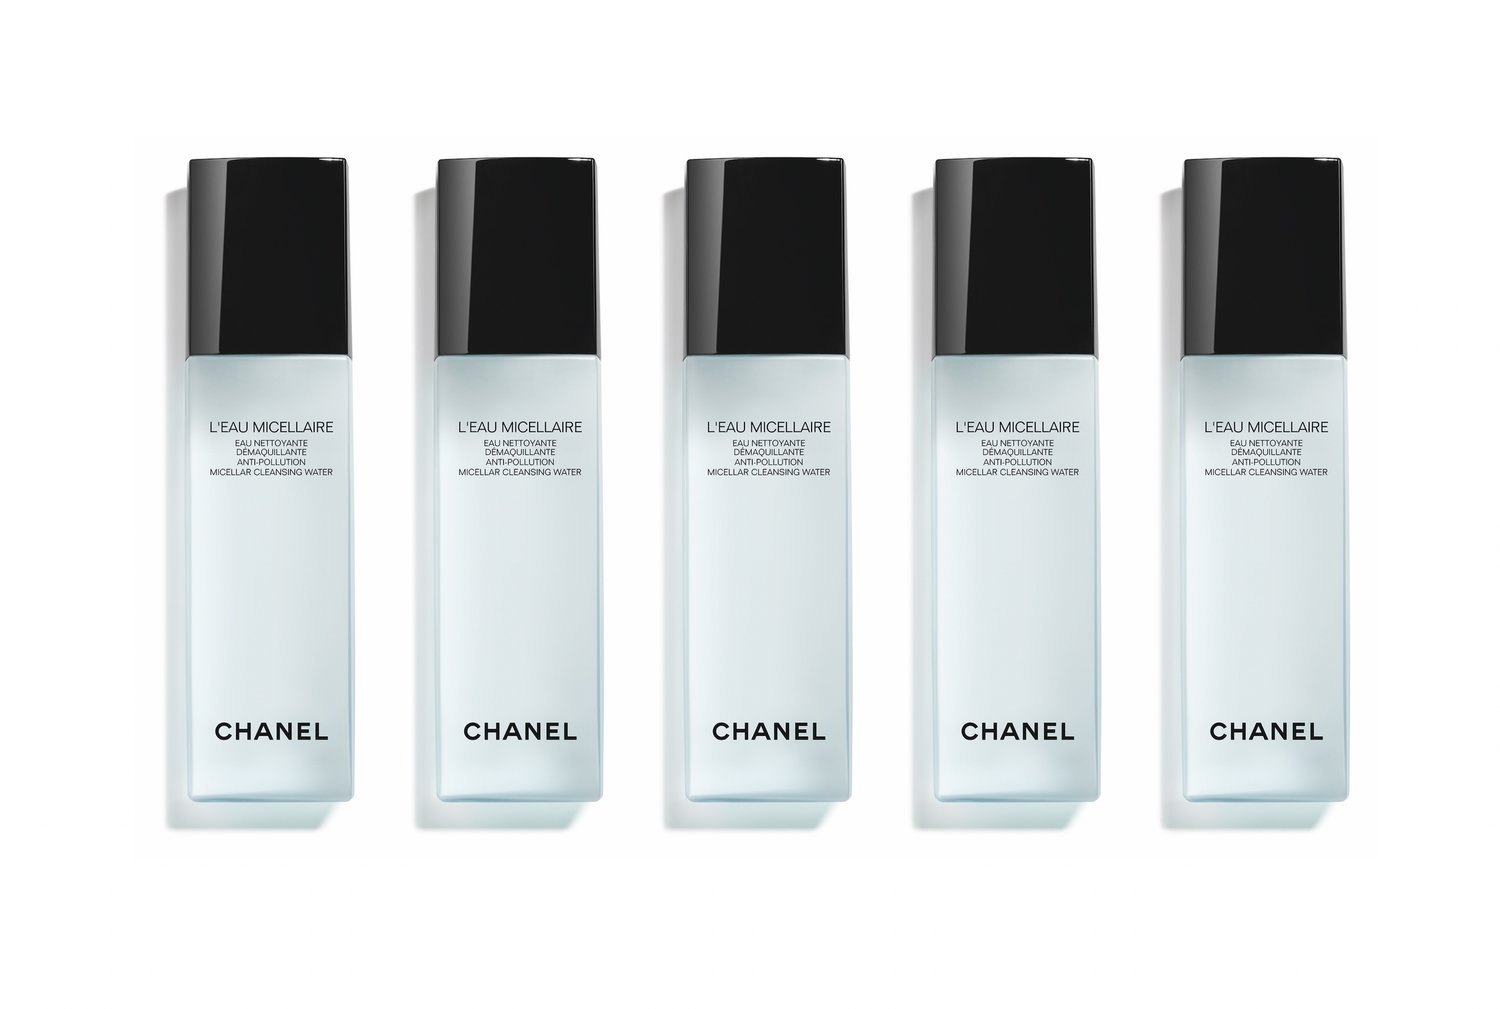 CHANEL - L'EAU MICELLAIRE by CHANEL removes makeup and cleanses all skin  types, particularly sensitive skin, in a single step. Discover more on  chanel.com/-EauMicellaire-2019